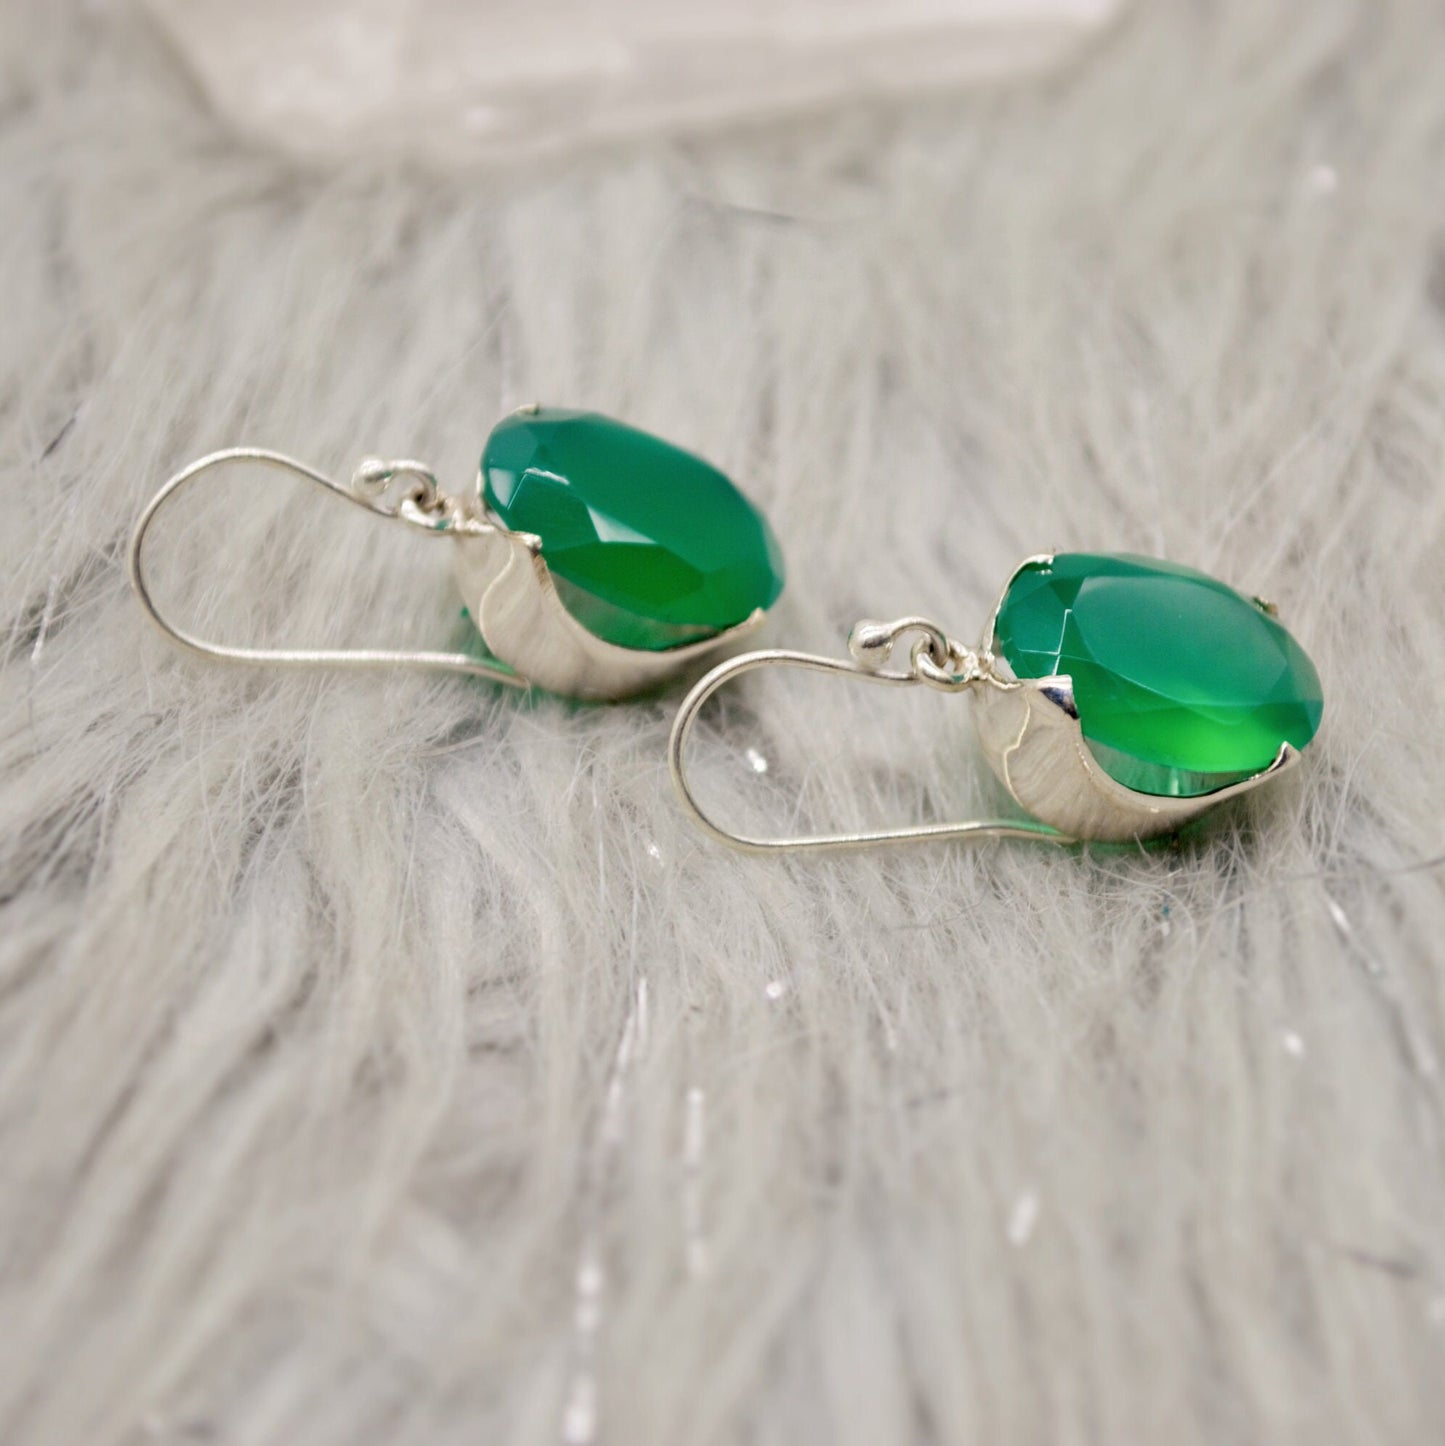 Green Onyx Earrings, Sterling Silver Gemstone Earrings, Birthstone Jewelry, Birthday Gifts For Her, Bridesmaid Gifts, Christmas, birthday